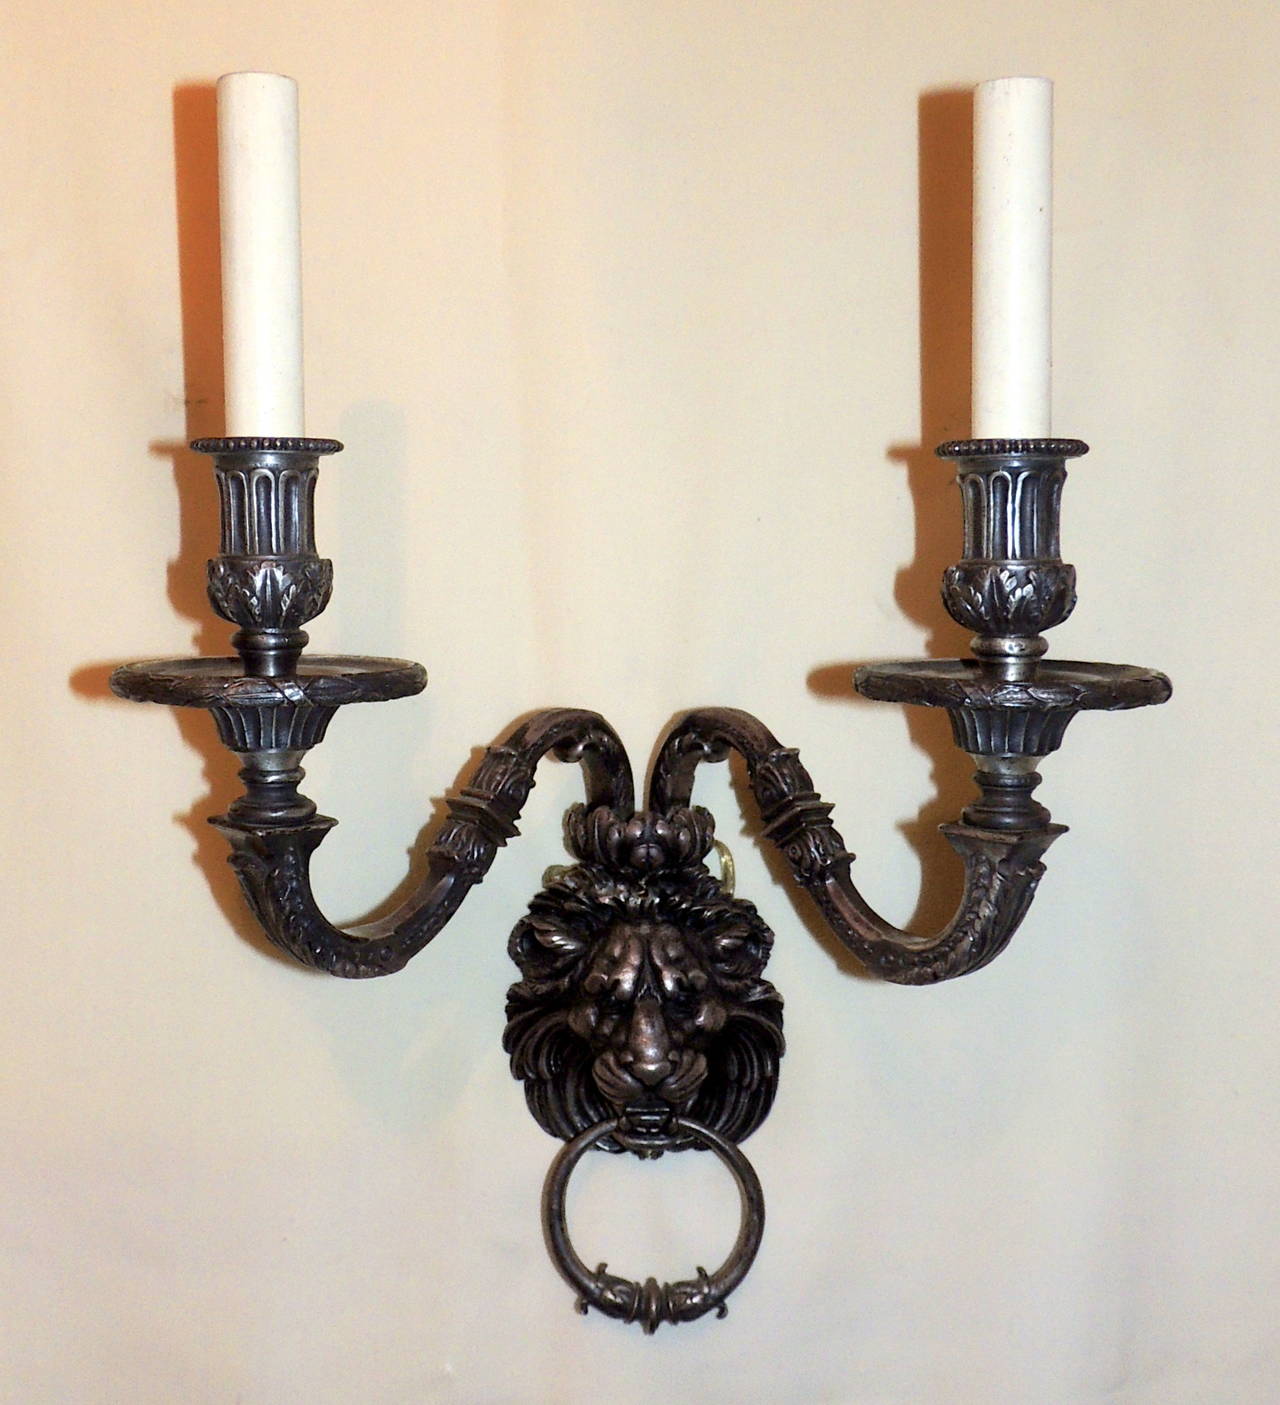 Wonderful pair of silvered bronze lion head sconces with rings. Beautiful strong detail everywhere you look. From the arms to the cups, the majestic lion's face and even detail on the hanging rings. Marked style 108 on back, very faint marks, but